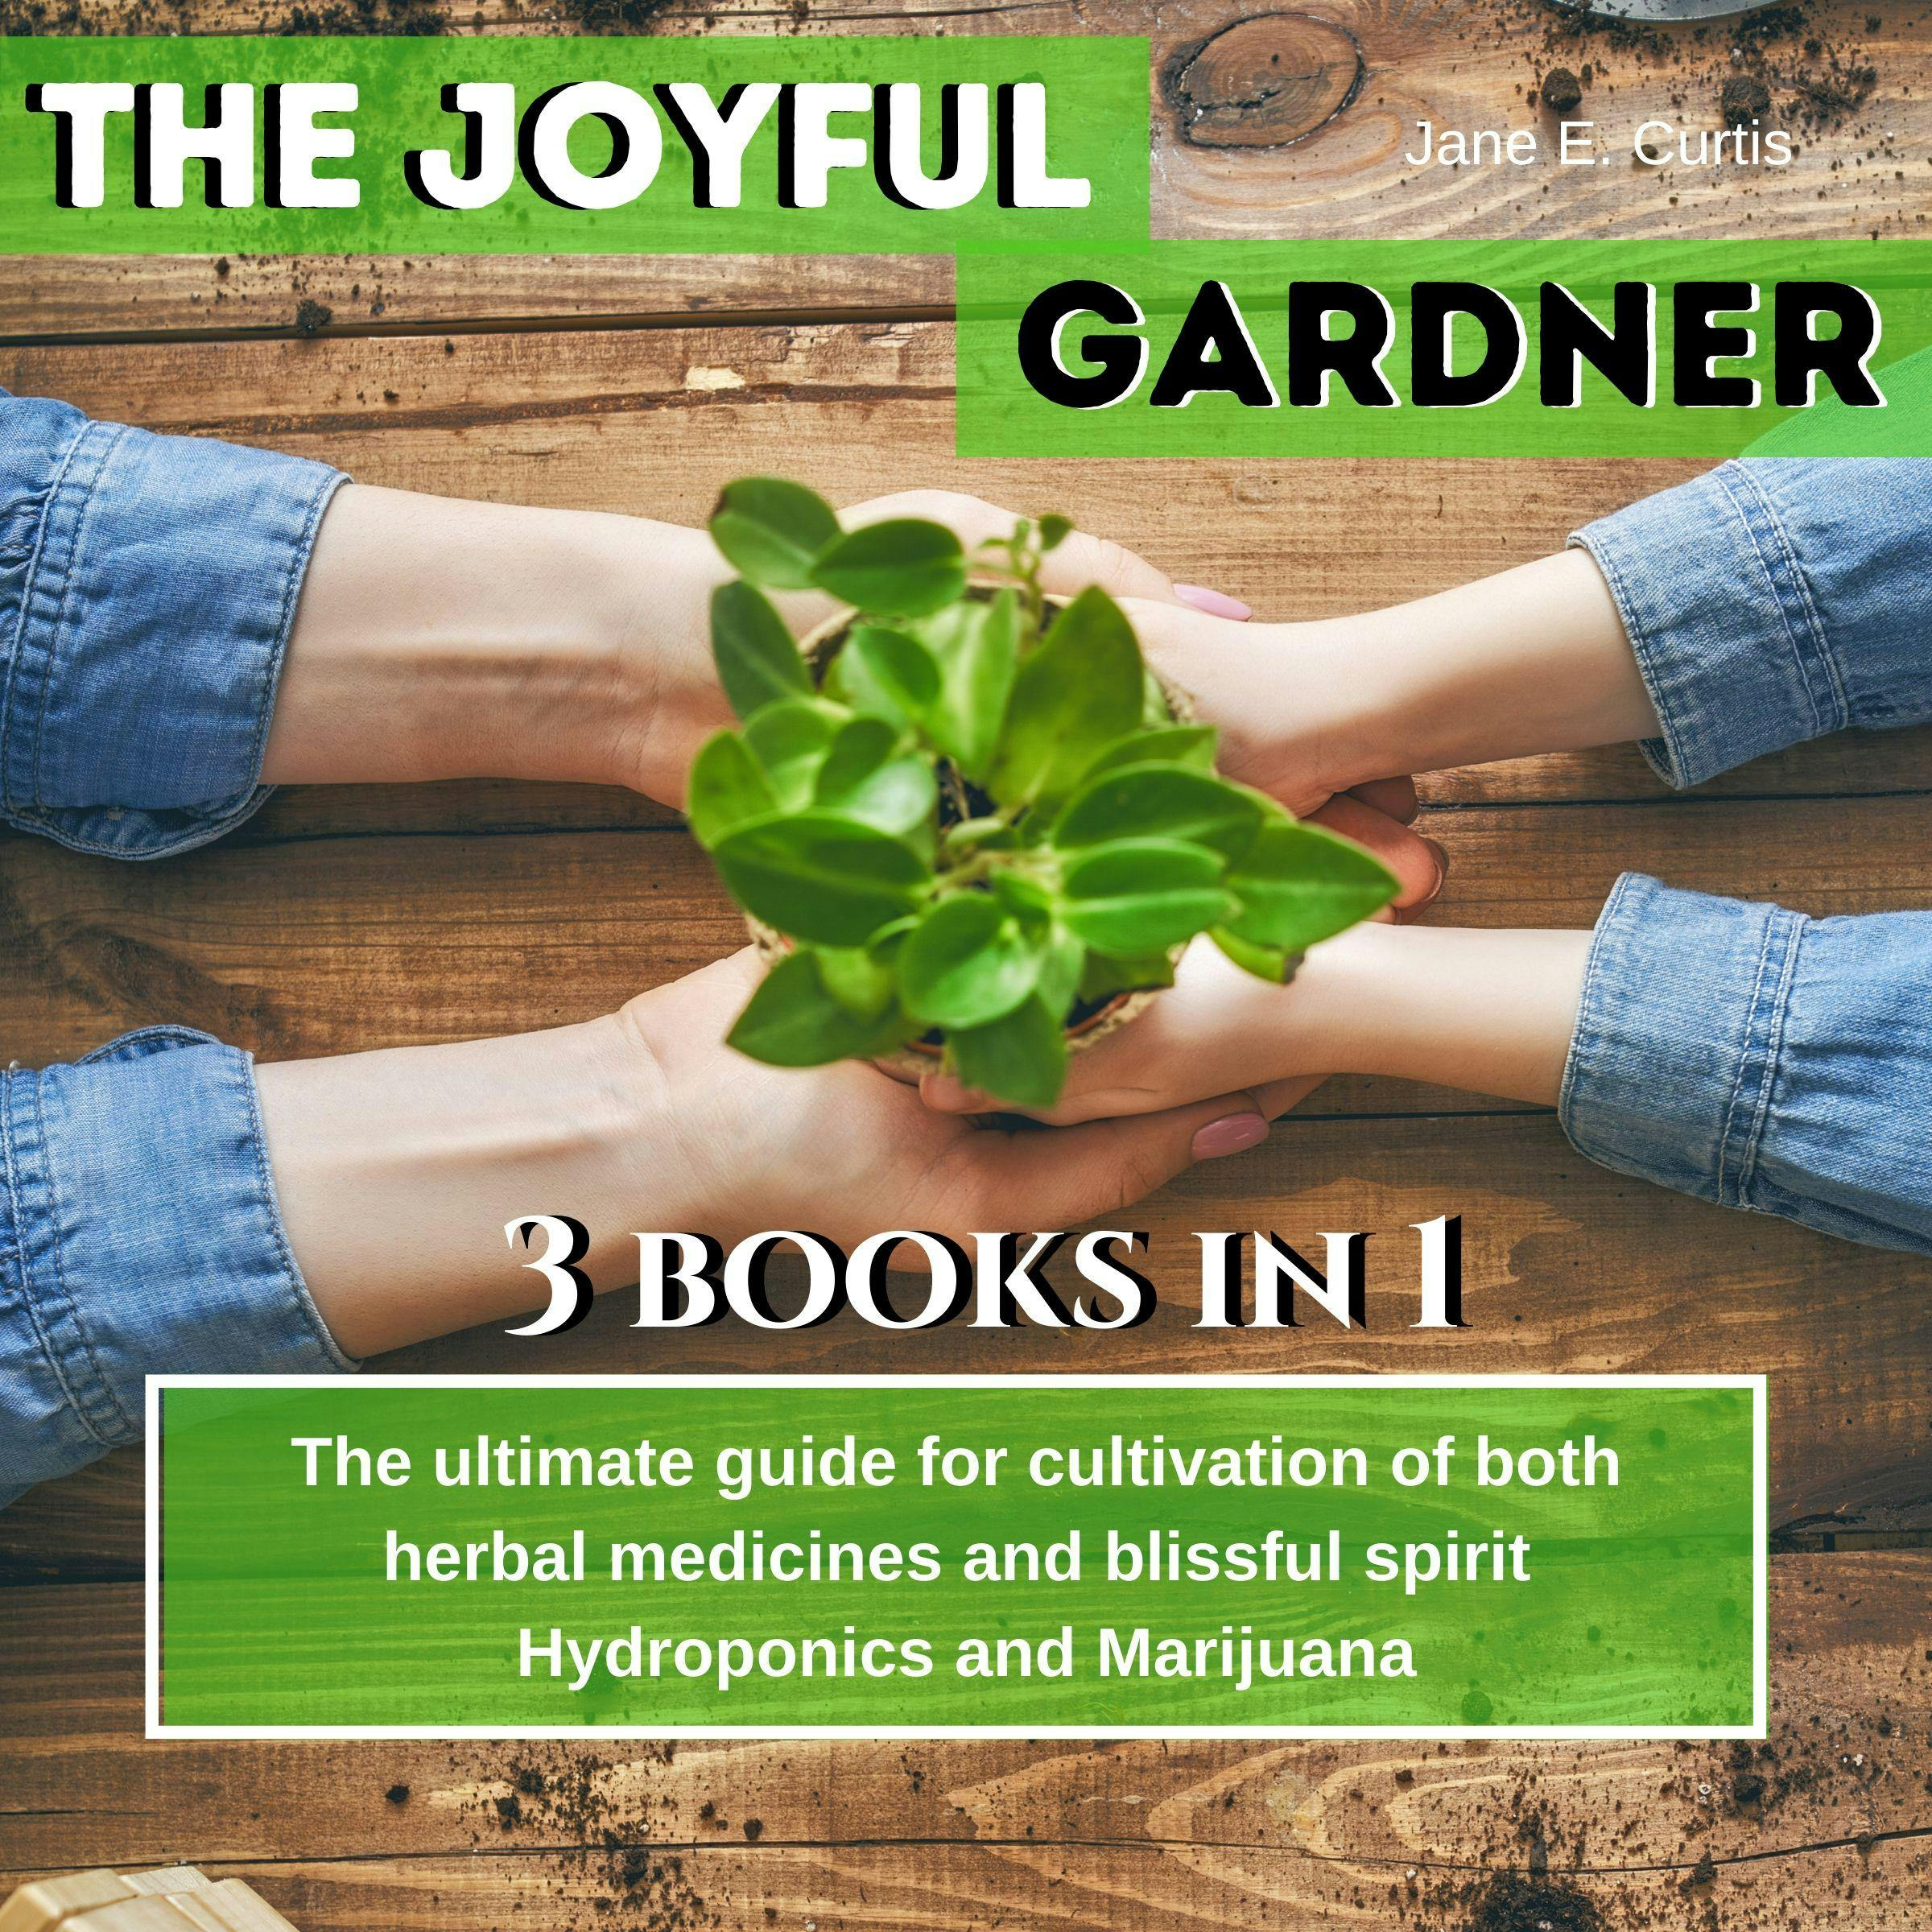 The Joyful Gardener: The ultimate guide for  cultivation of both Alkaline herbal medicines  and blissful spirit, Hydroponics and Medical Marijuana - Jane E. Curtis